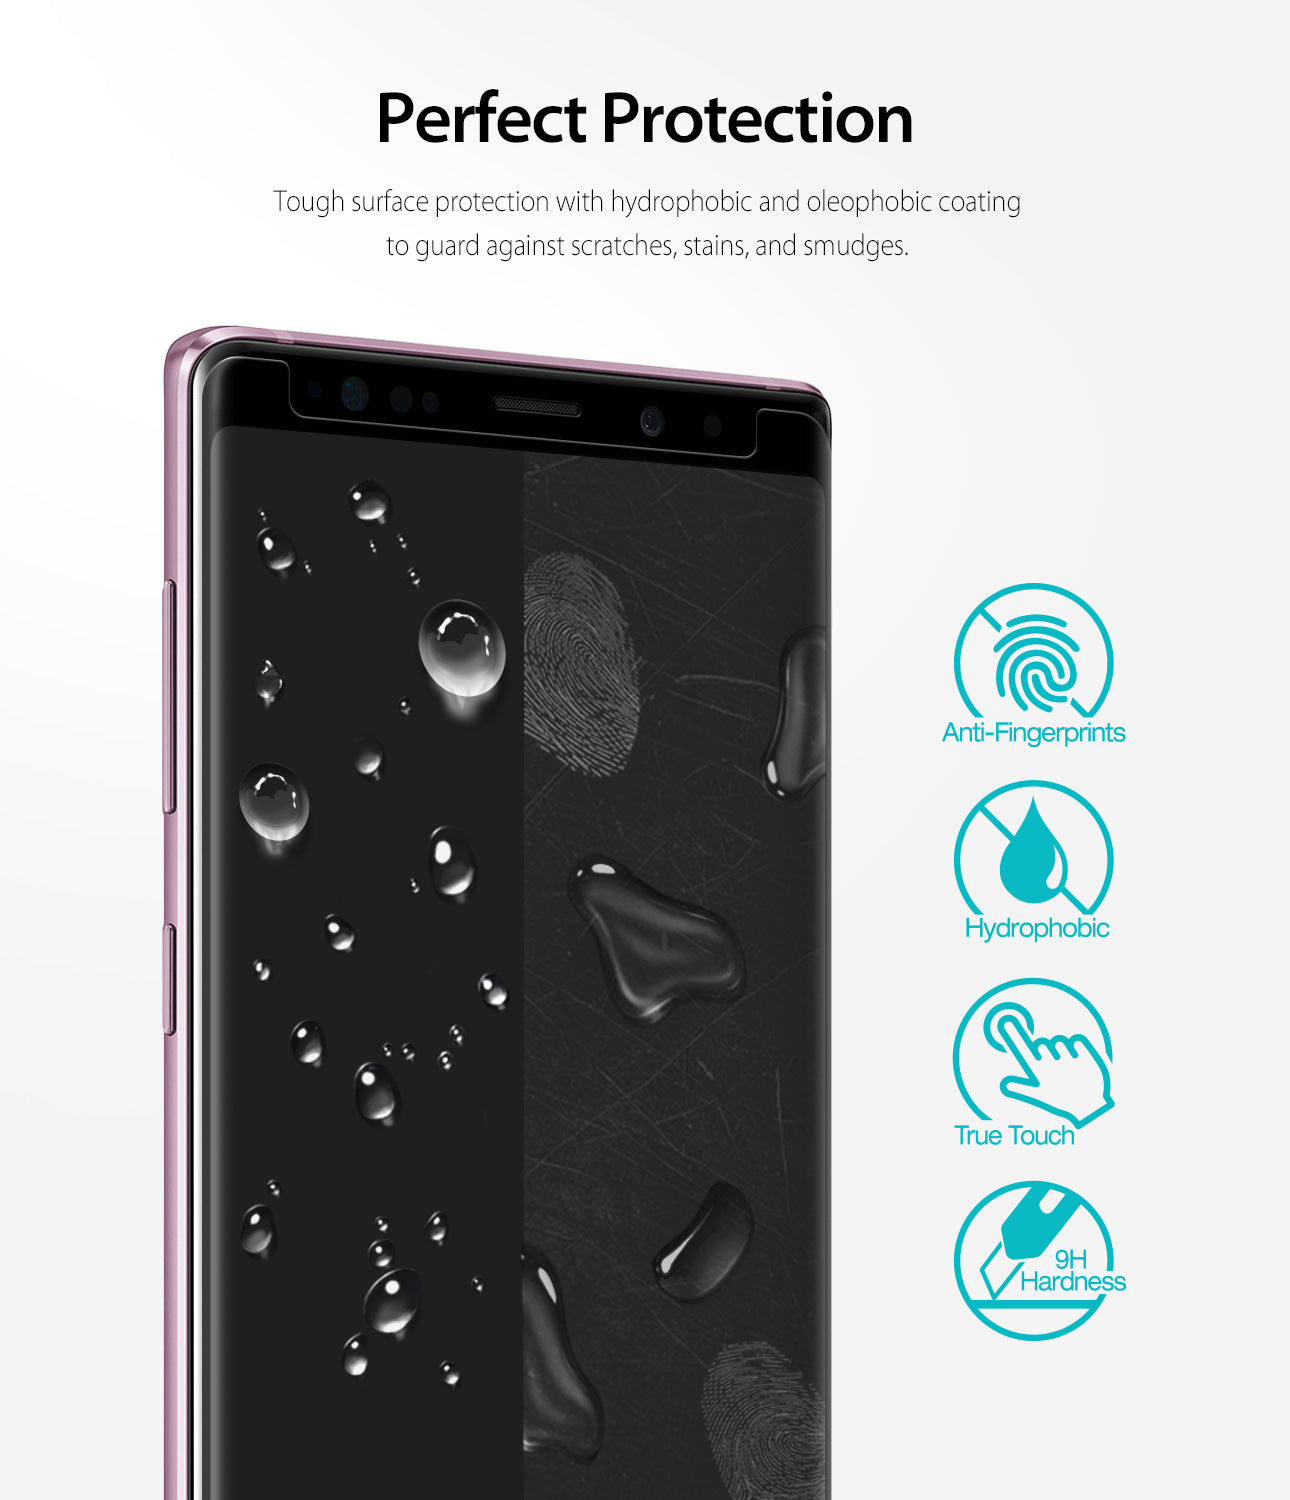 Galaxy Note 9 Screen Protector | Full Cover Glass (1P) - Perfect Protection. Tough surface protection with hydrophobic and oleophobic coating to guard against scratches, stains, and smudges.